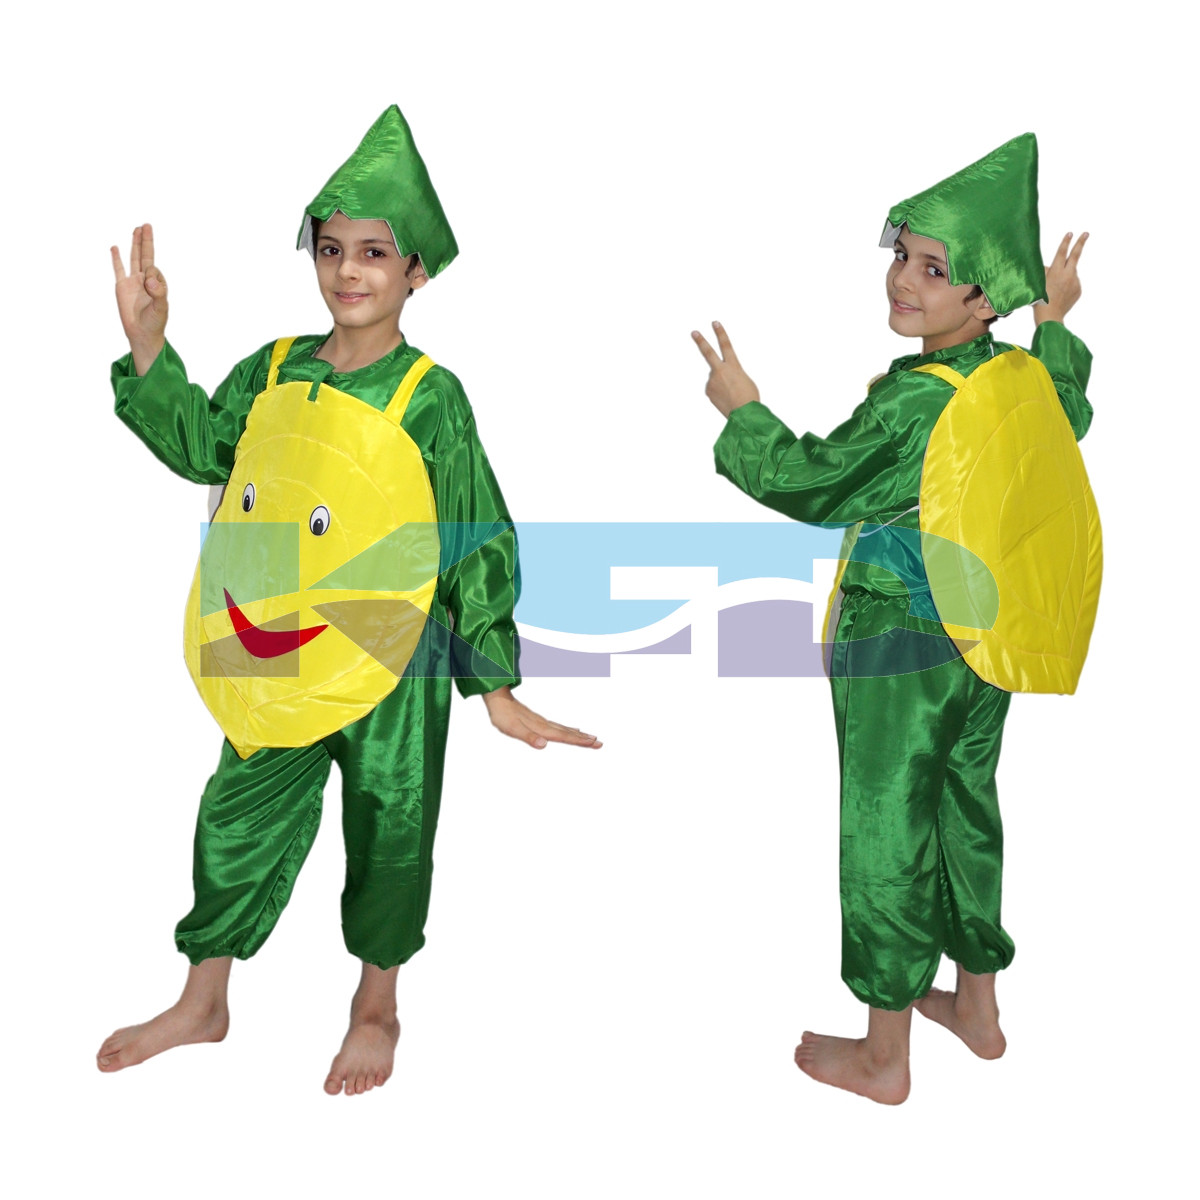 Lemon fancy dress for kids,Vegetable Costume for School Annual function/Theme Party/Competition/Stage Shows Dress